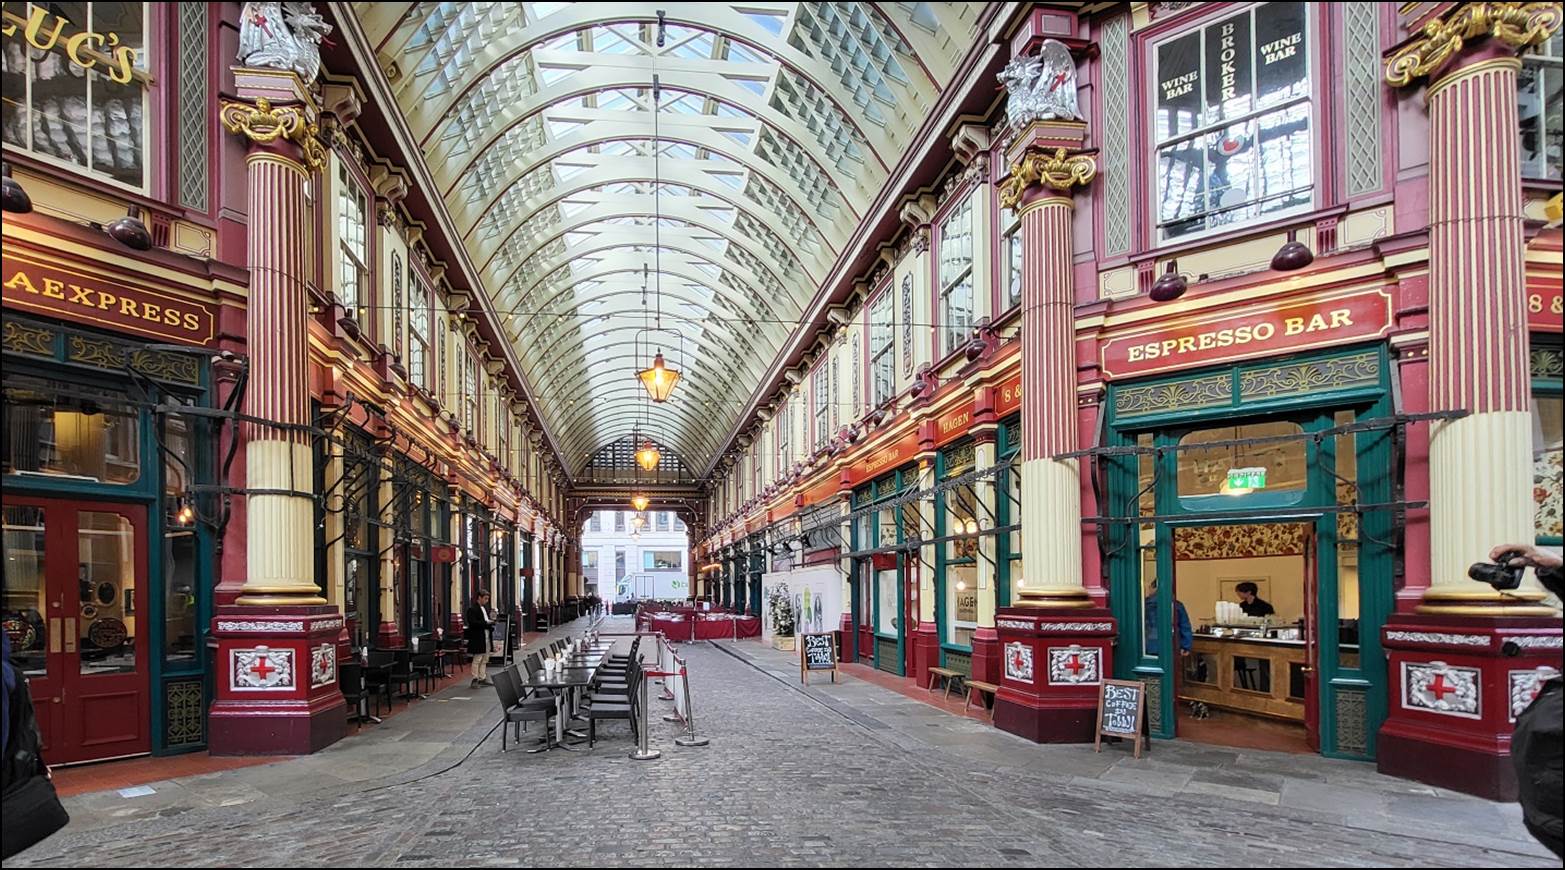 Leadenhall Market with many windows

Description automatically generated with medium confidence